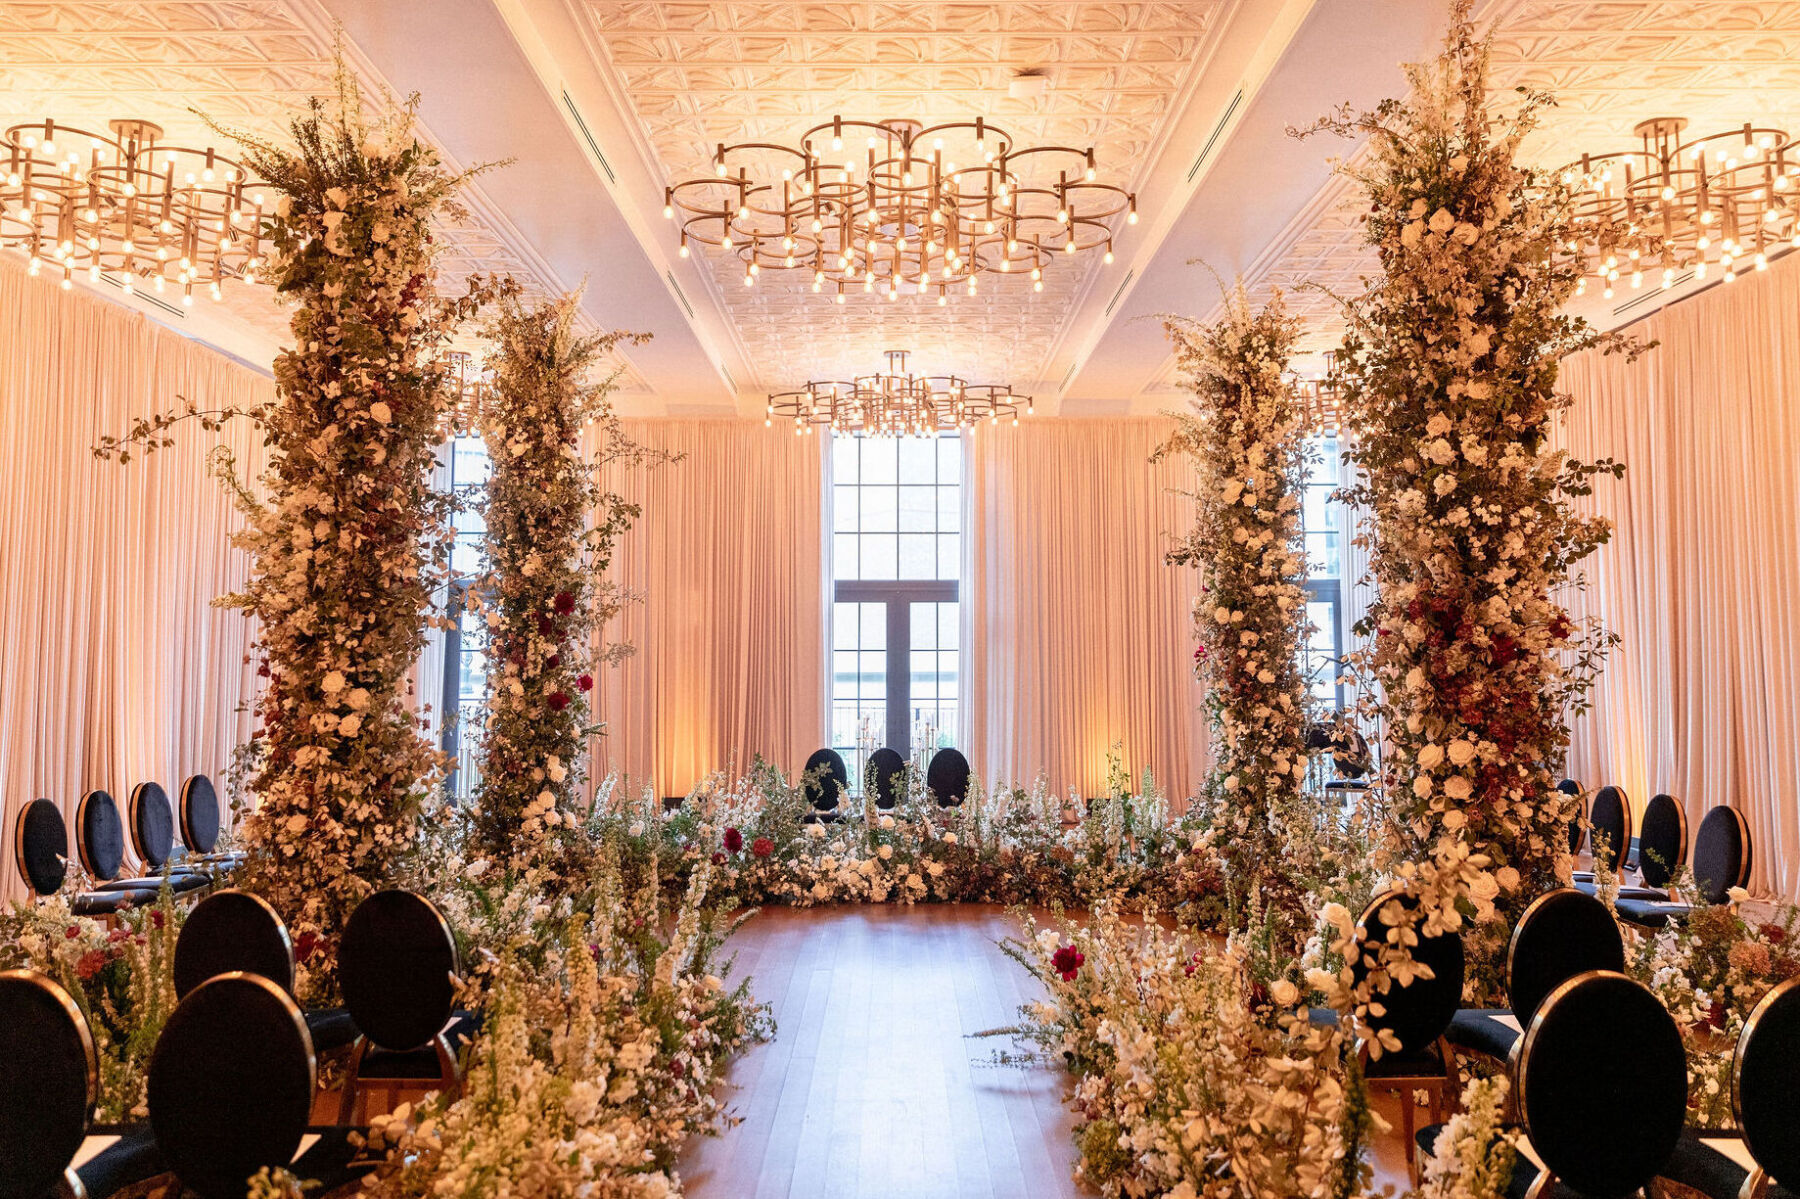 An indoor ceremony in the-the-round with floral columns and black-and-gold chairs.